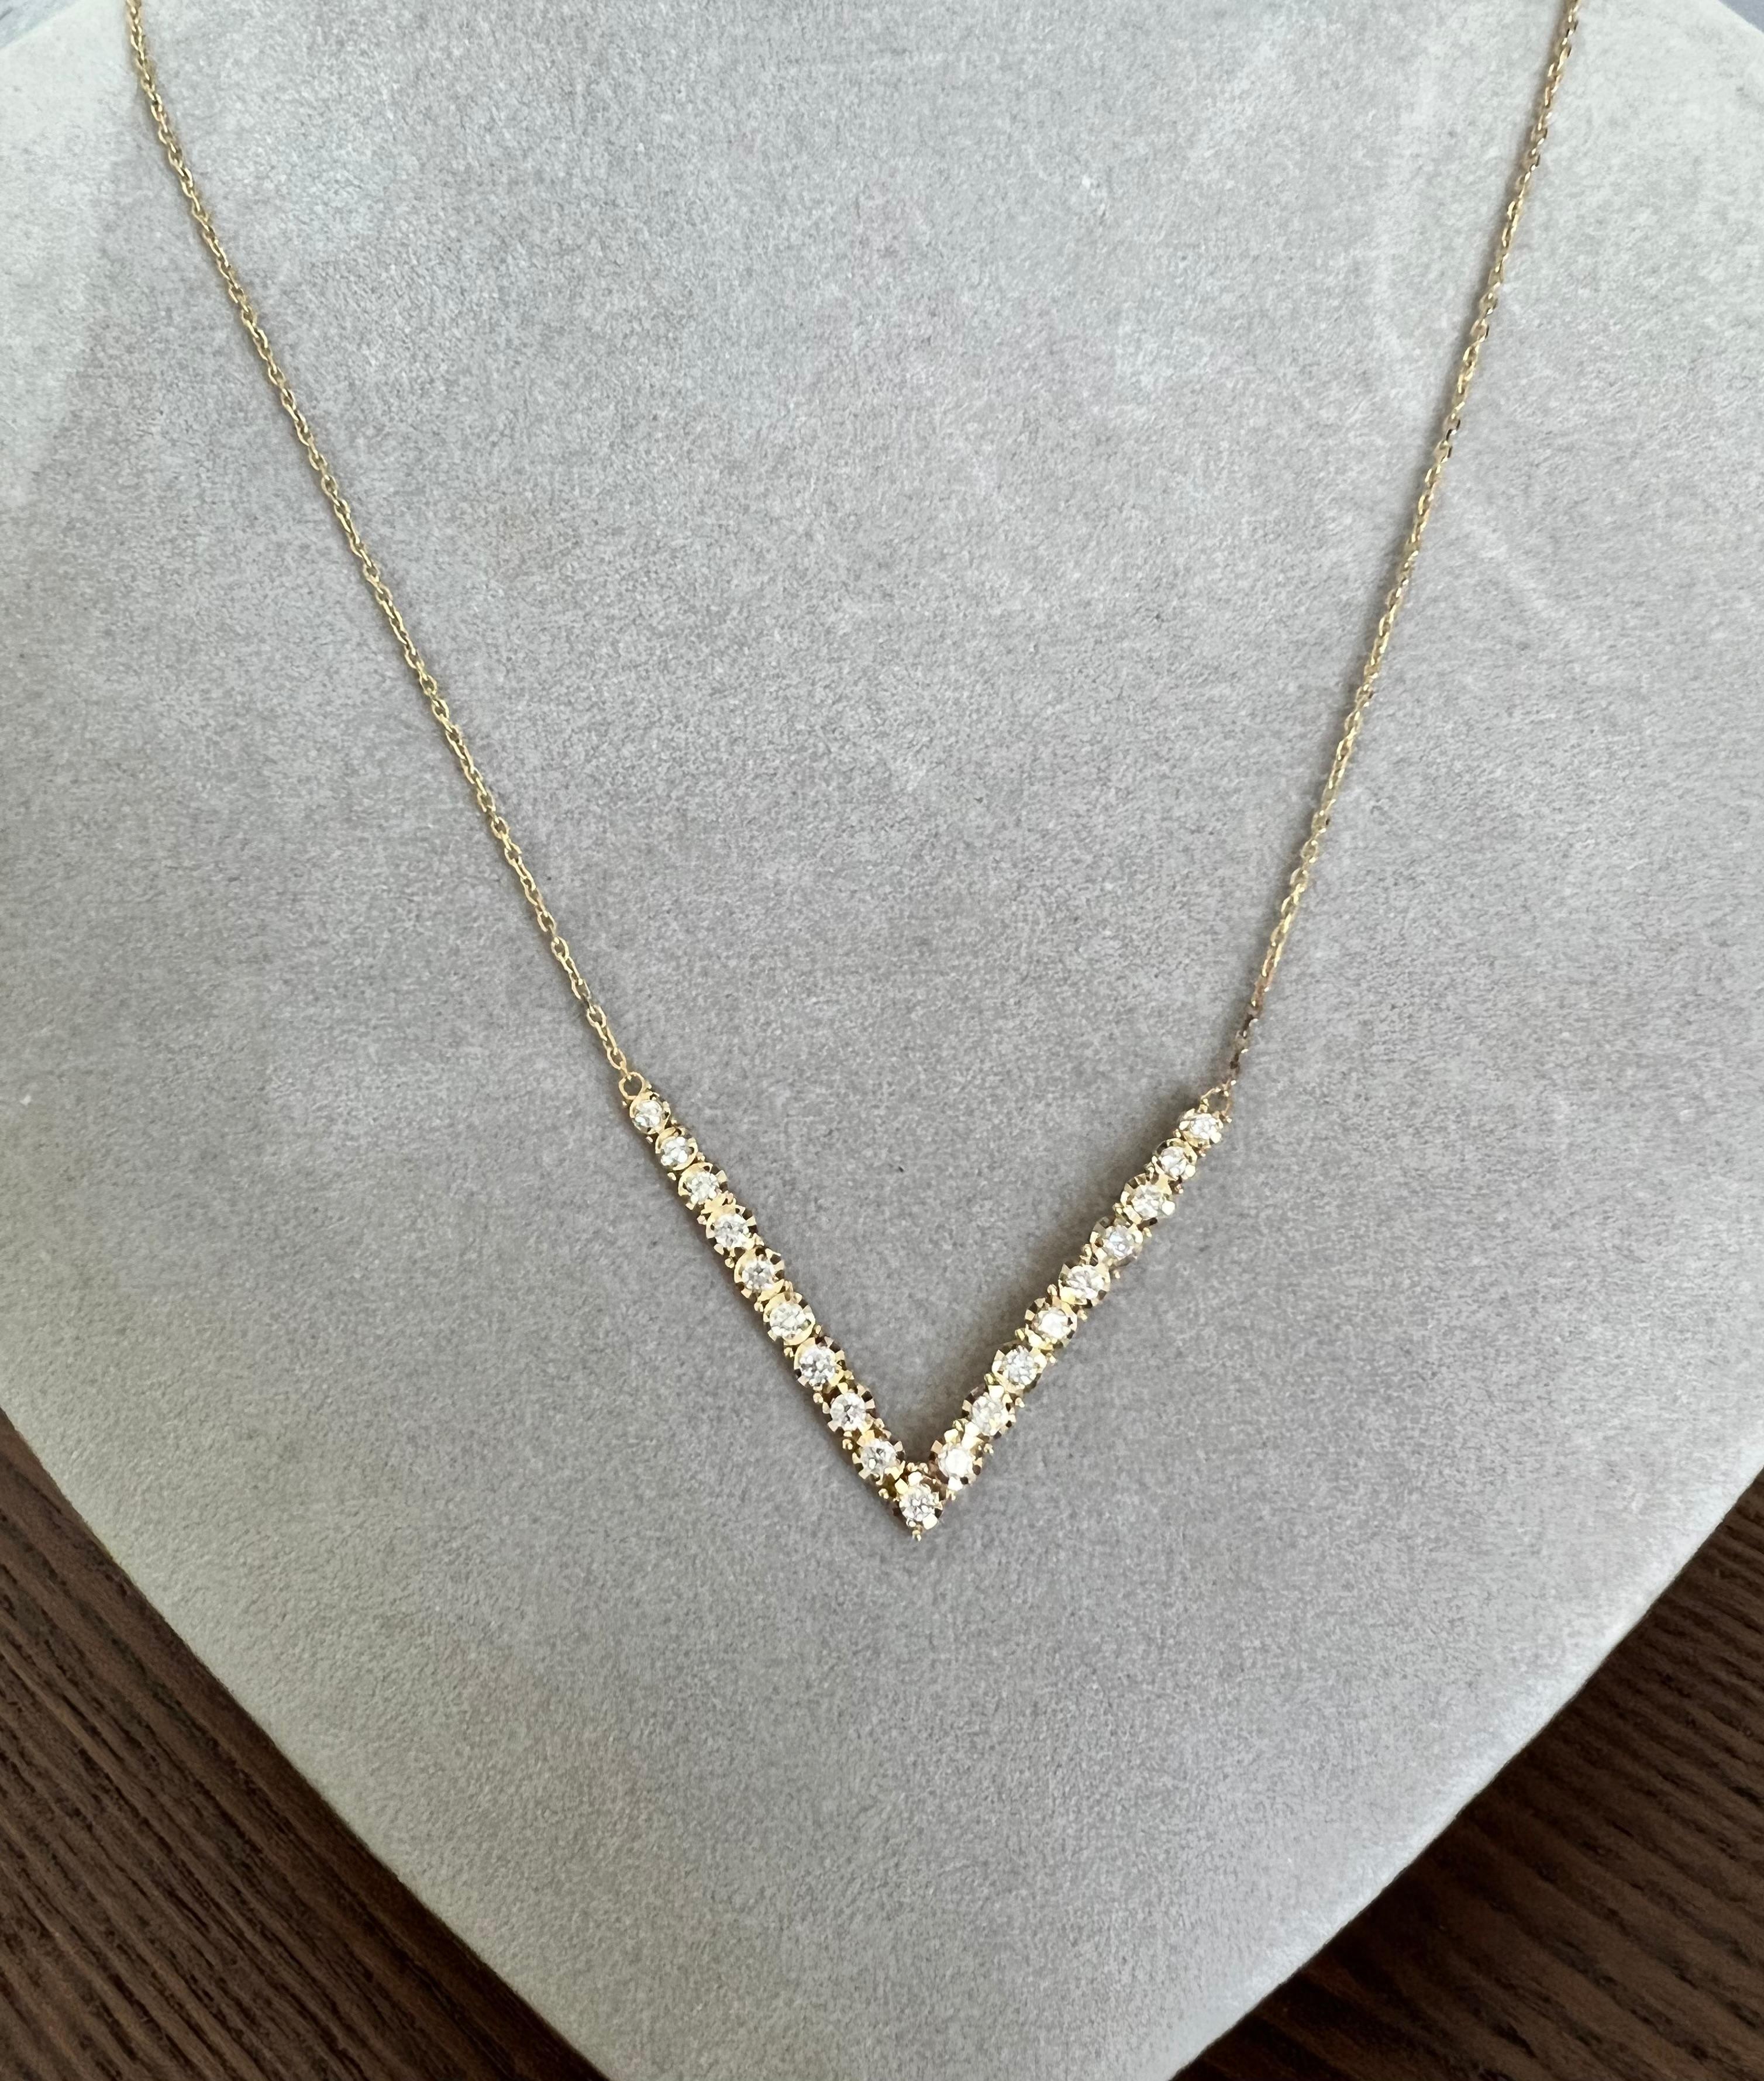  This Chain Necklace has a V-Shaped Necklace that has 19 Round Cut Diamonds (Clarity: SI, Color: F) that weigh 0.88 Carats. The Clarity and Color of the diamonds are SI-F. 

It is beautifully curated in 14 Karat Yellow Gold and weighs 4.1 grams. The